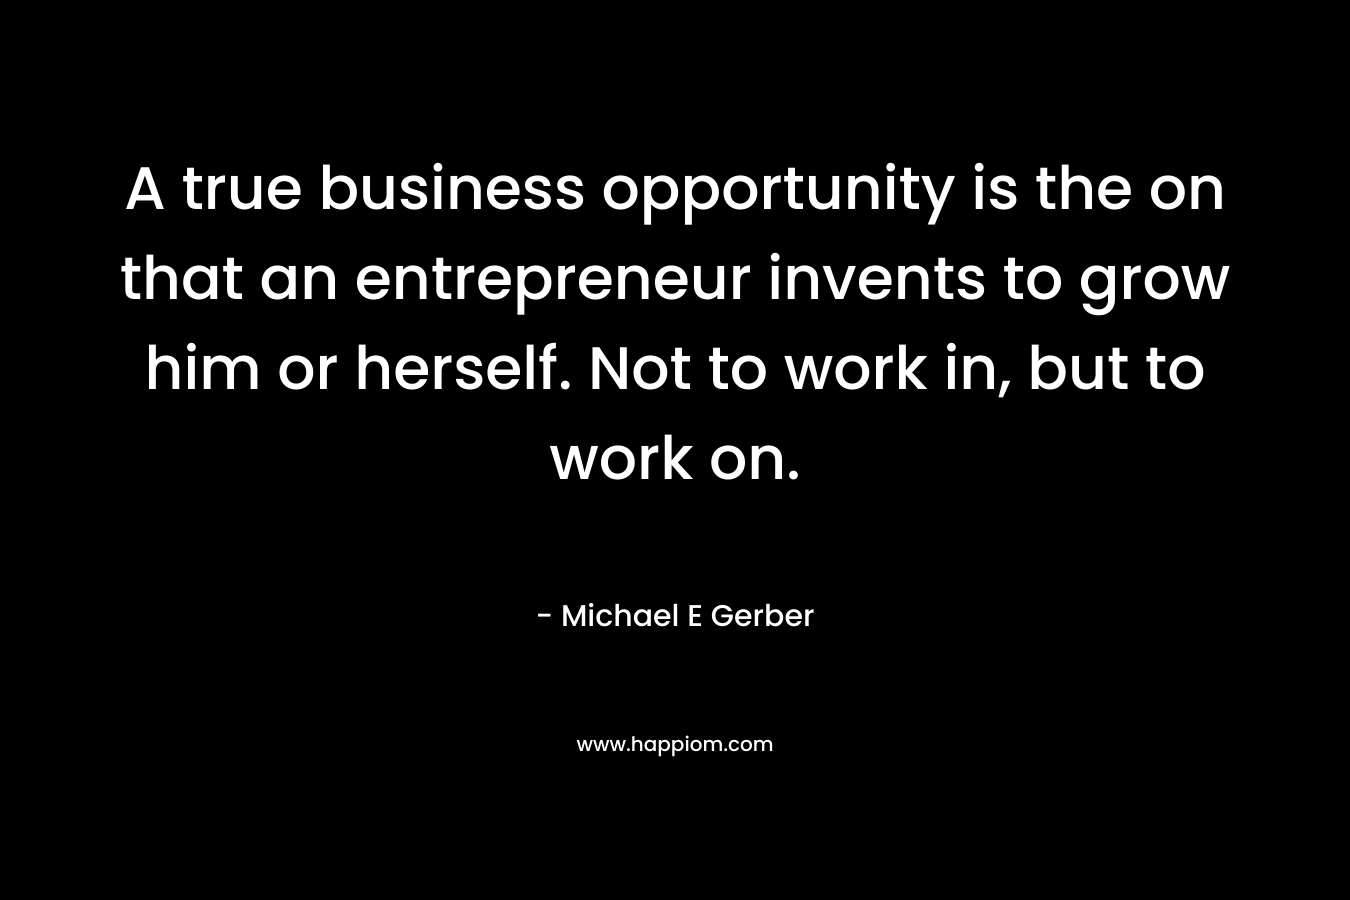 A true business opportunity is the on that an entrepreneur invents to grow him or herself. Not to work in, but to work on. – Michael E Gerber